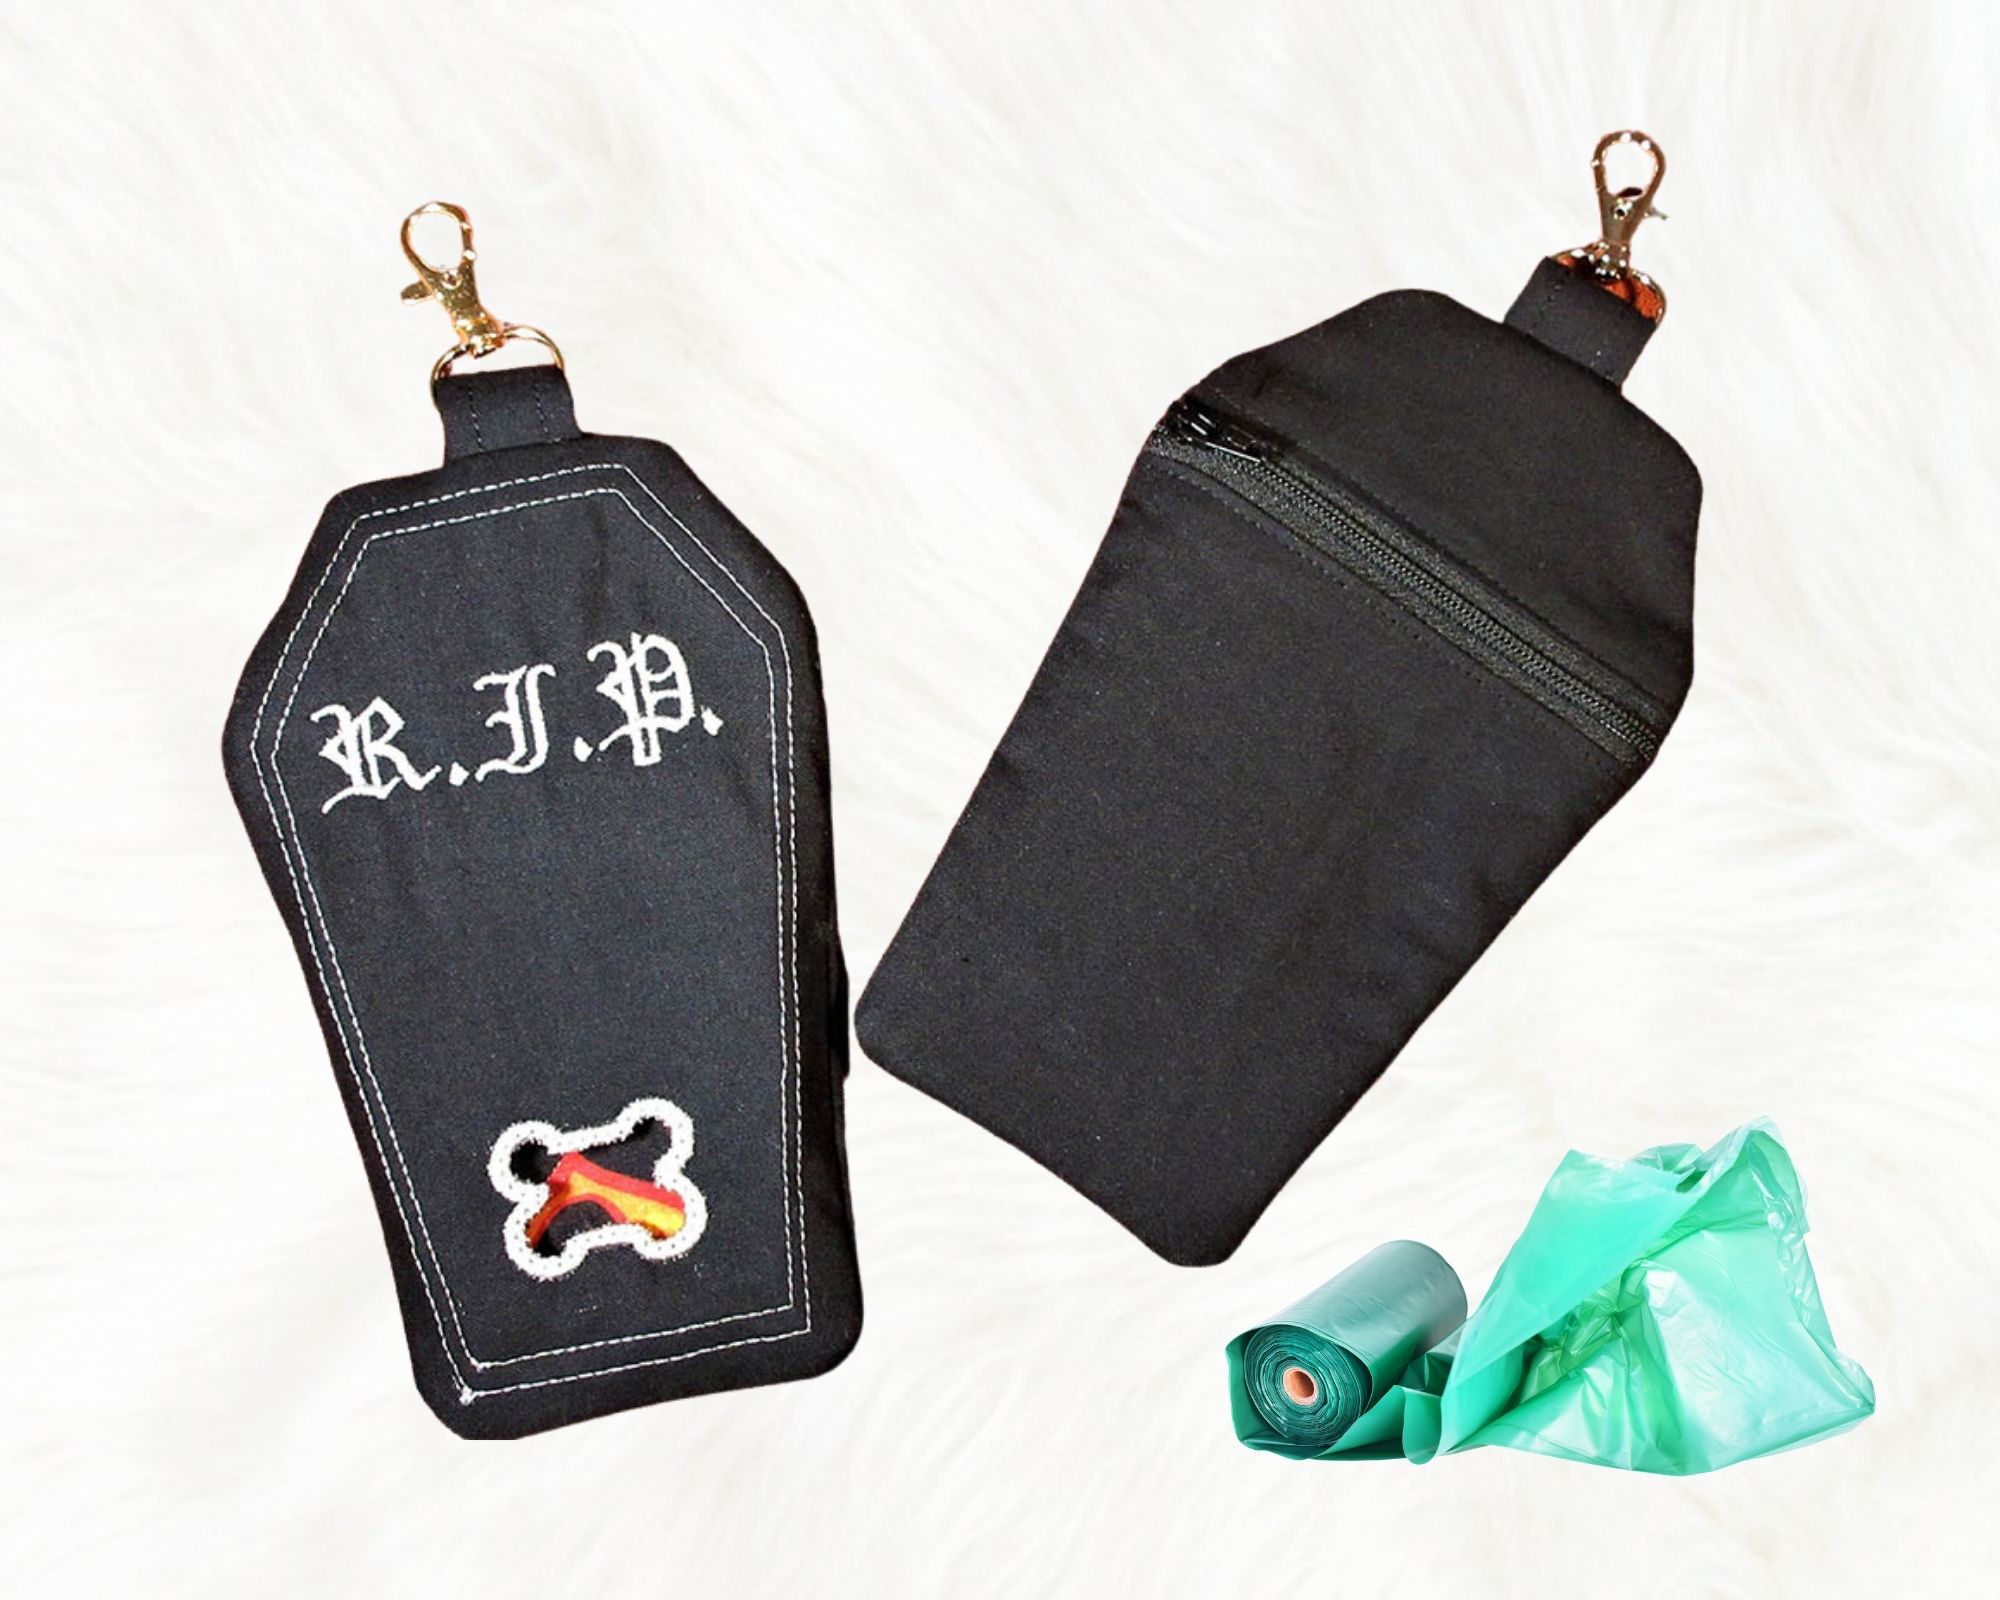 Coffin Shape Dog poop bag dispenser with free roll of bags. Embroidered RIP  and Dog Bone bag opening. Personalization is available